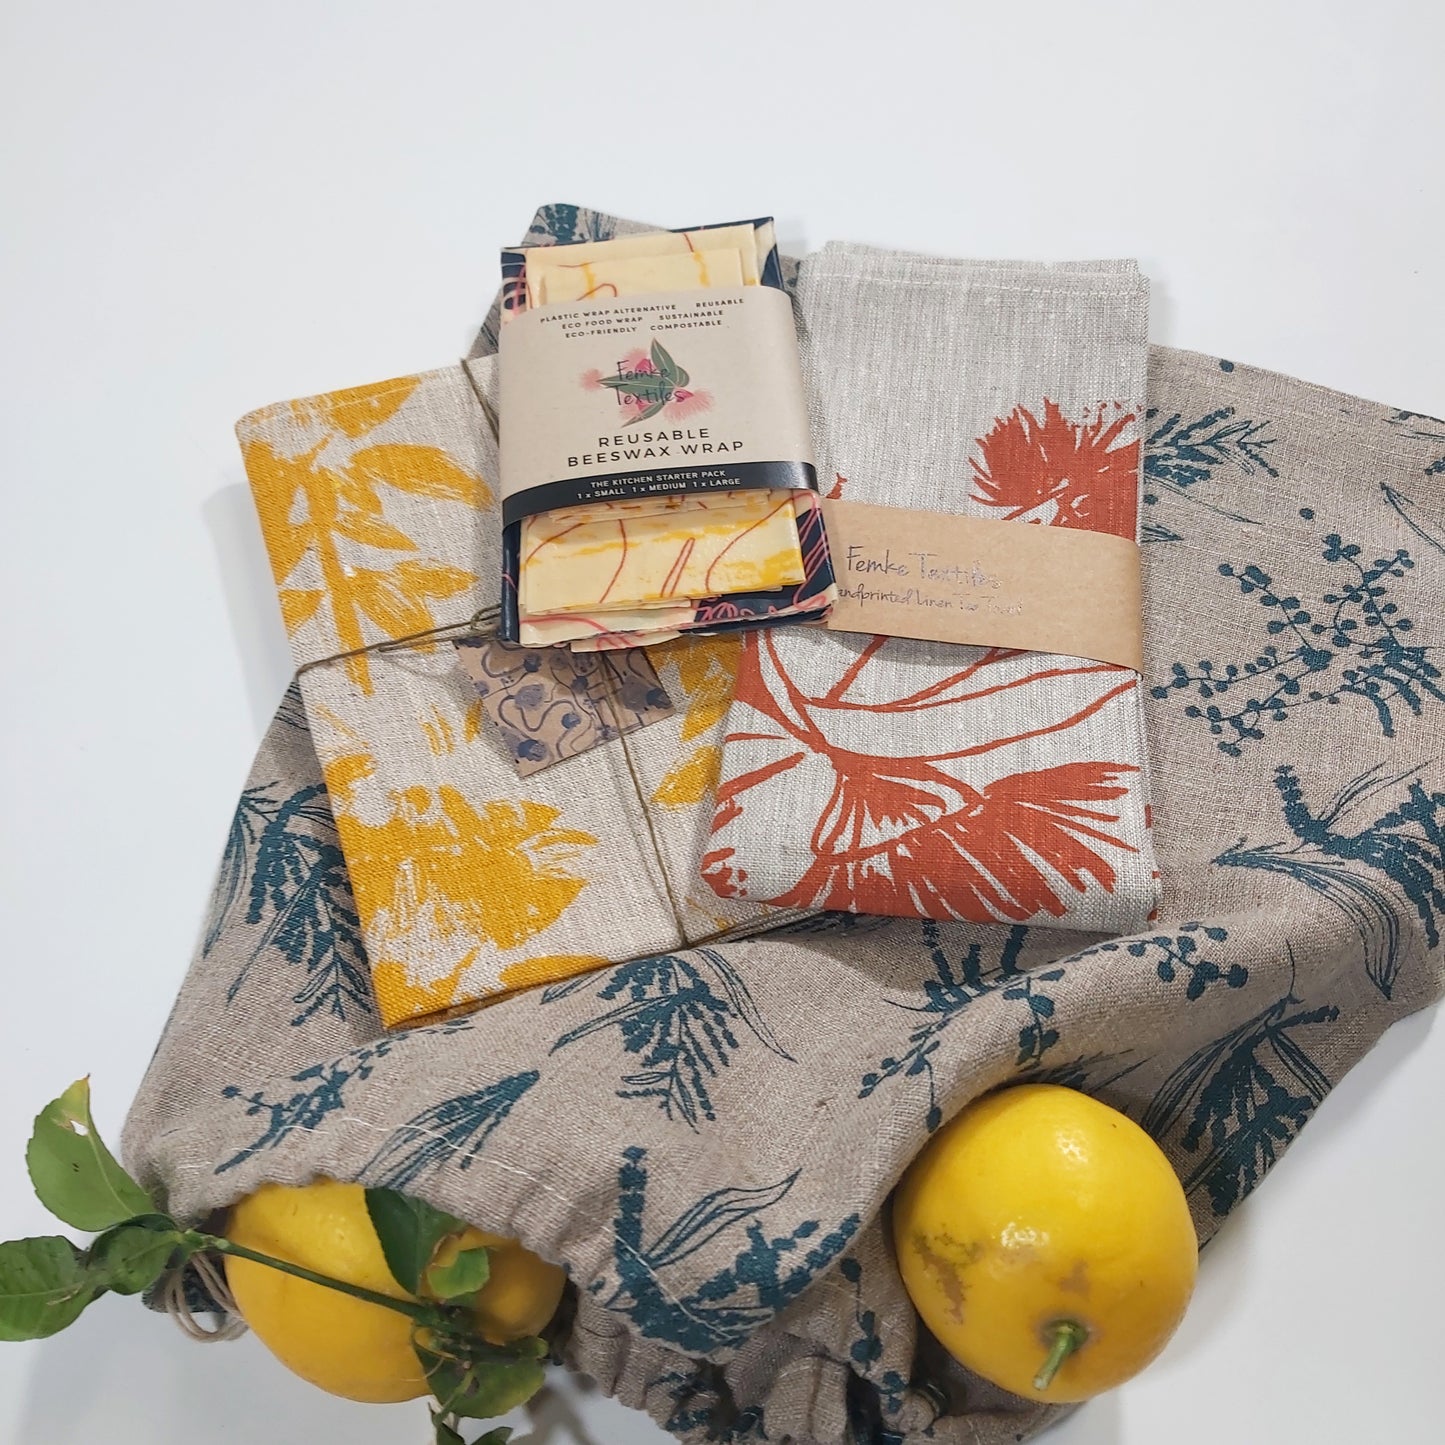 Kitchen starter pack featuring a tea towel, bread bag, set of napkins and beeswax wraps. Fabric screenprinted by Femke Textiles.